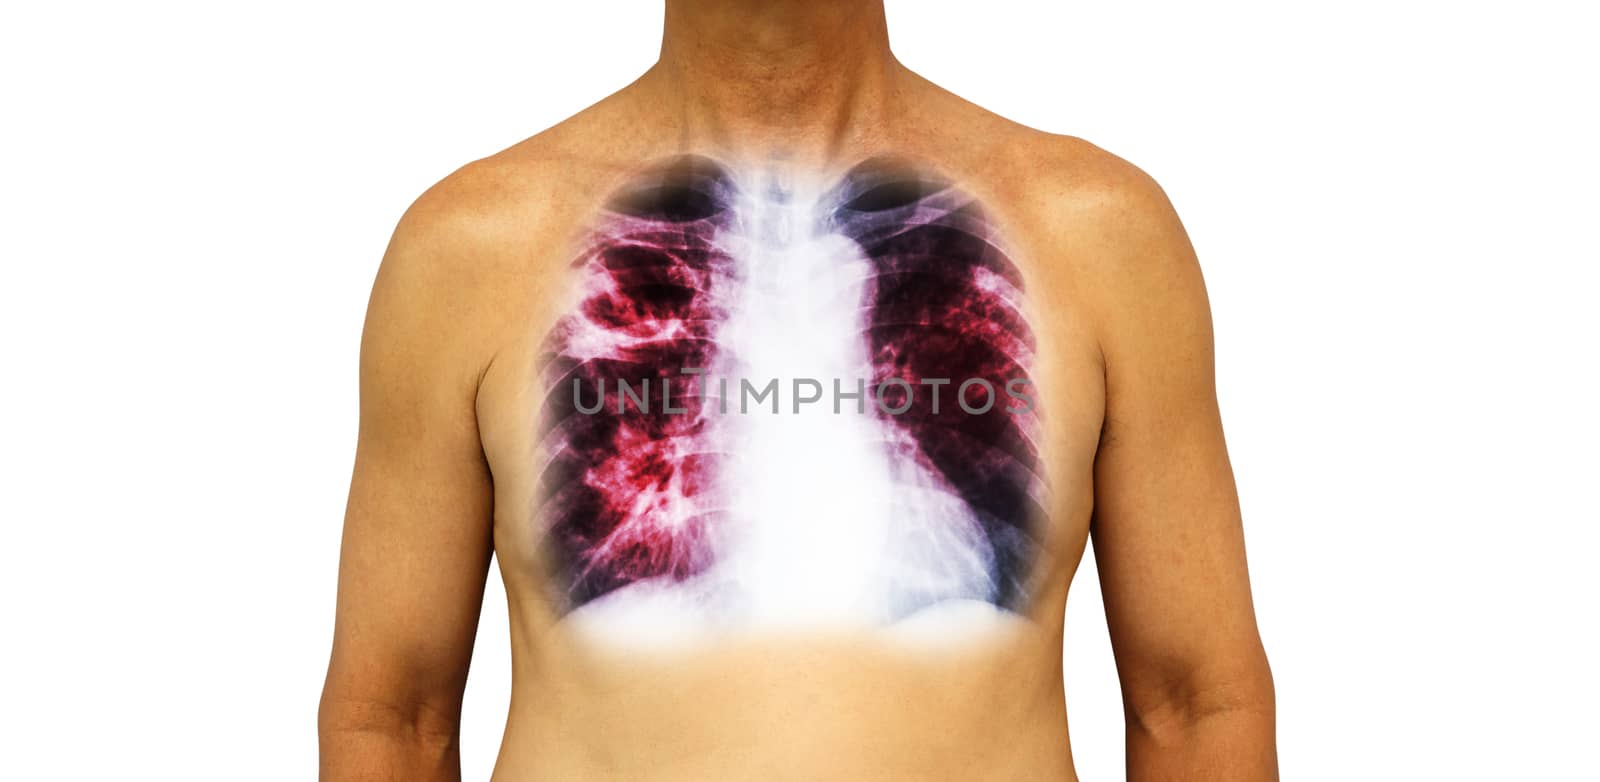 Pulmonary tuberculosis . Human chest with x-ray show cavity at right upper lung and interstitial infiltrate both lung due to infection . Isolated background by stockdevil